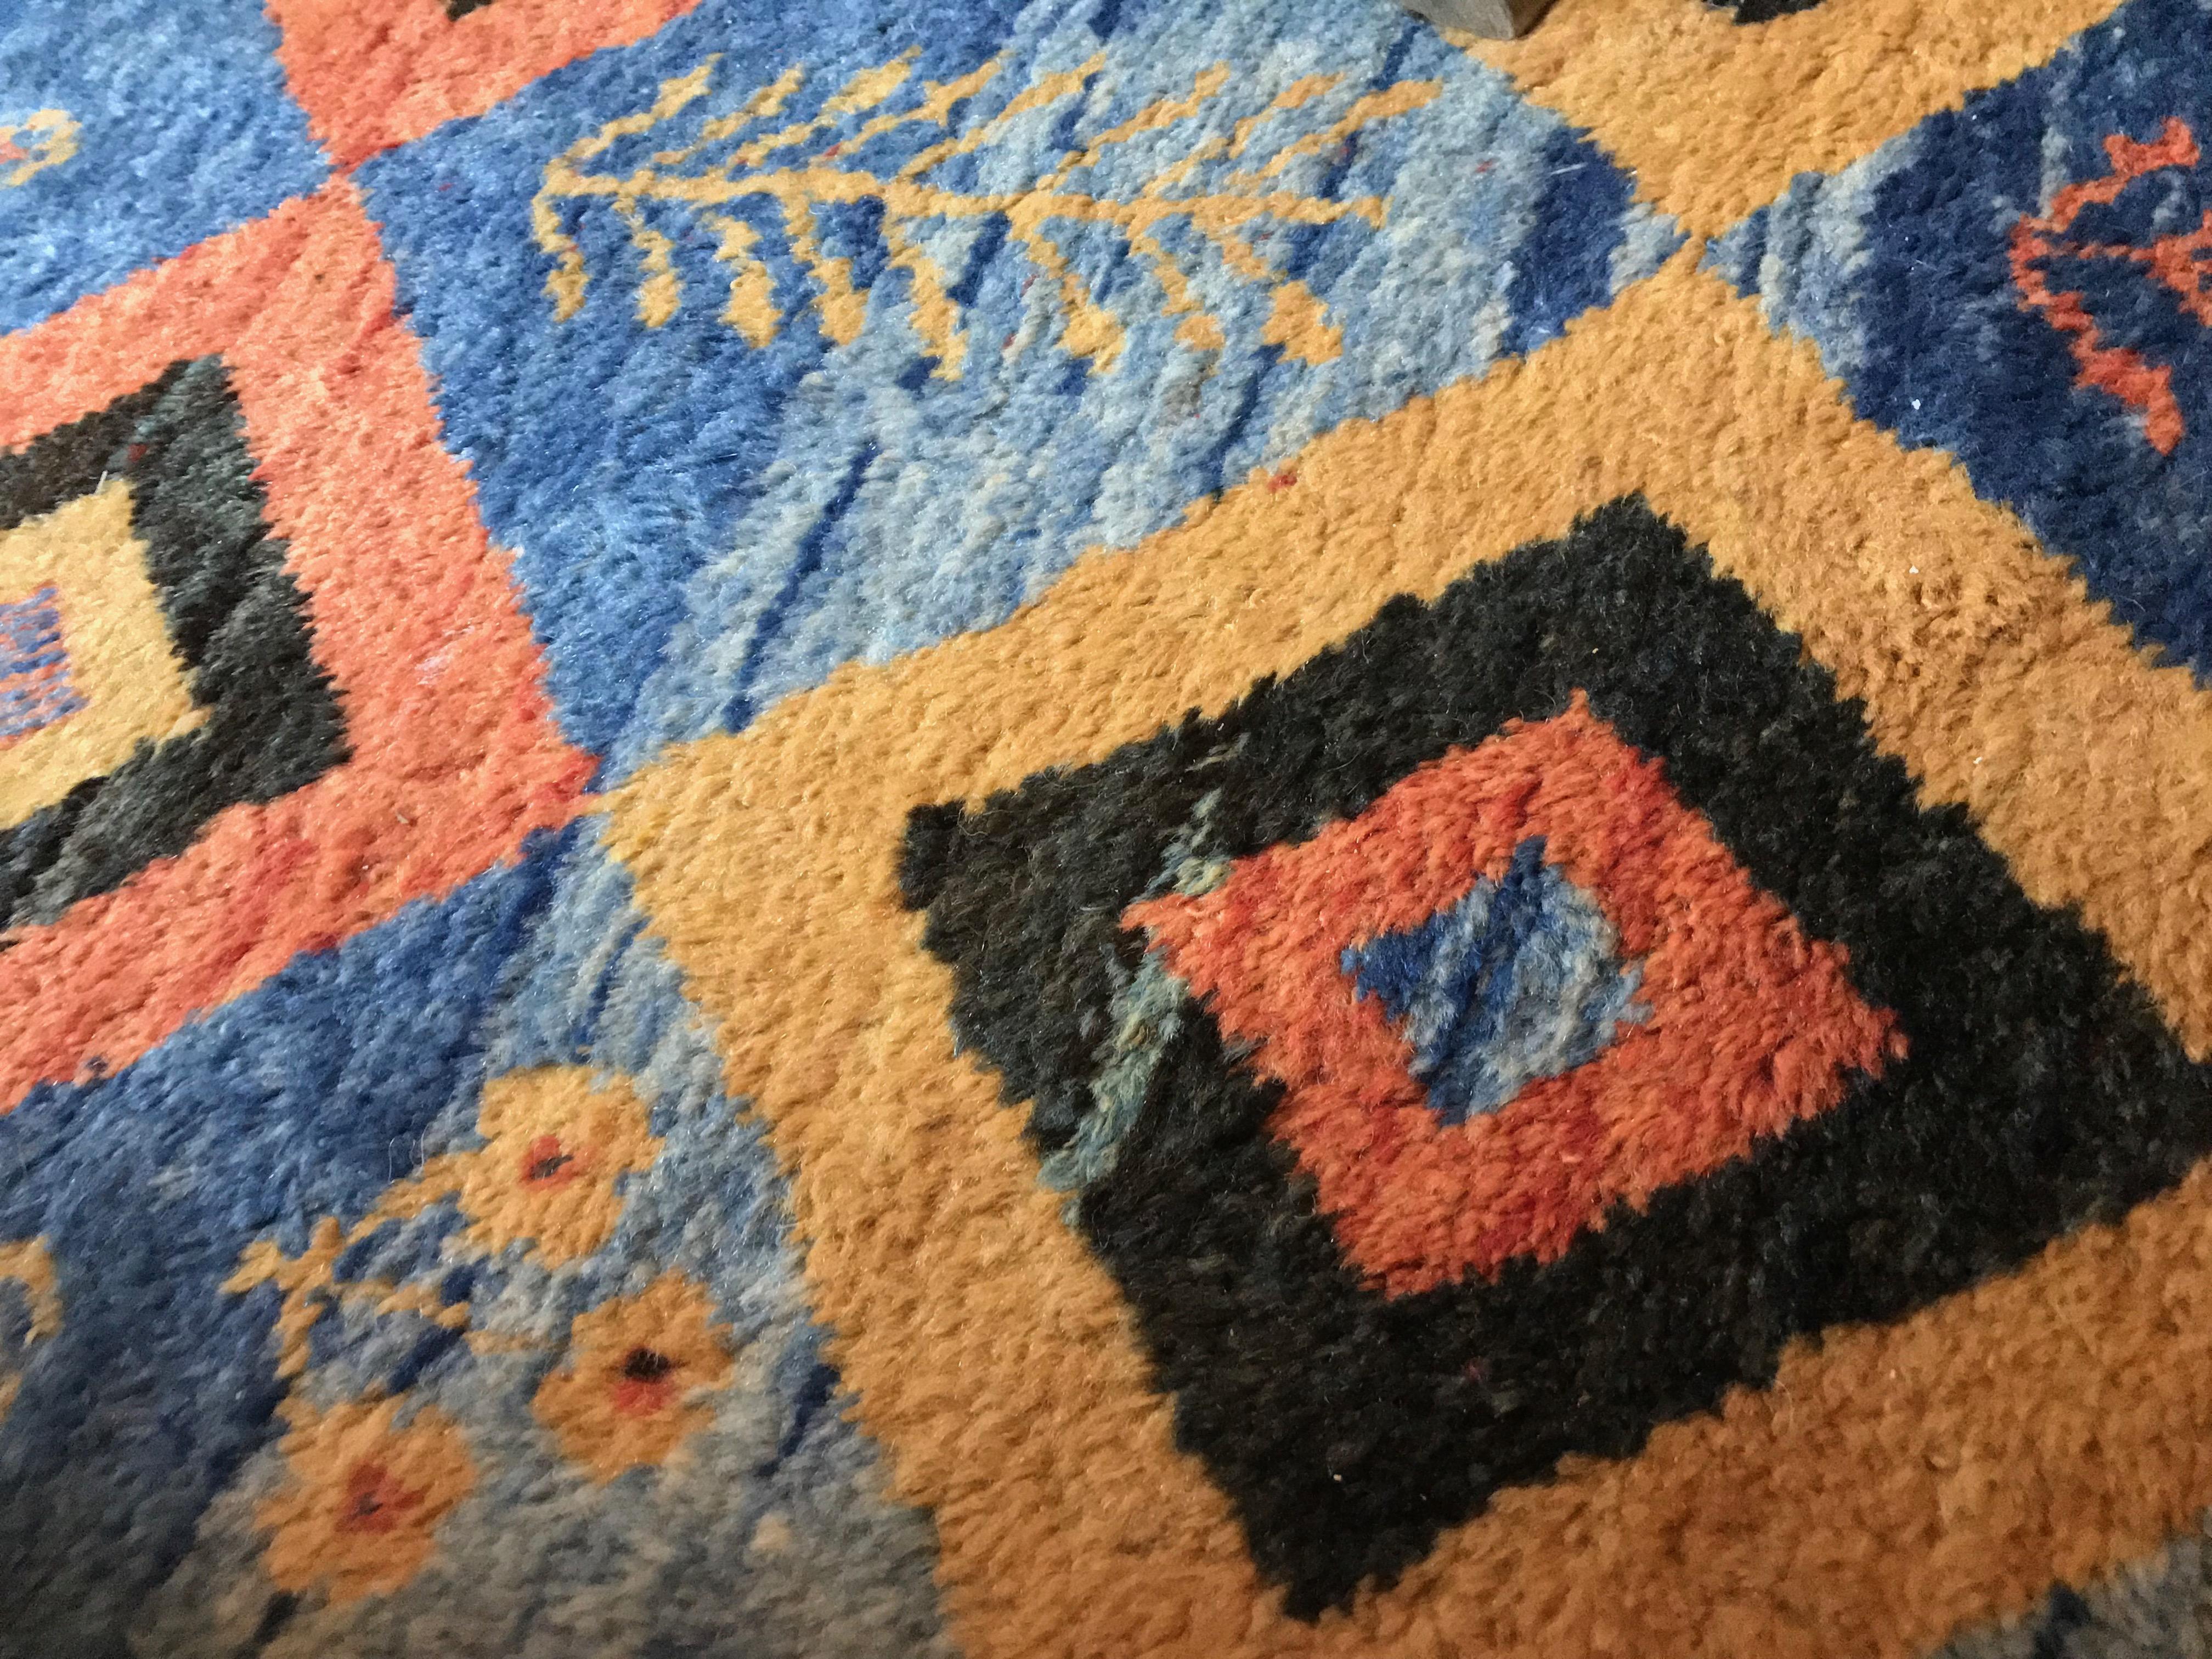 Asian Handwoven Persian Carpet with Vibrant Colors